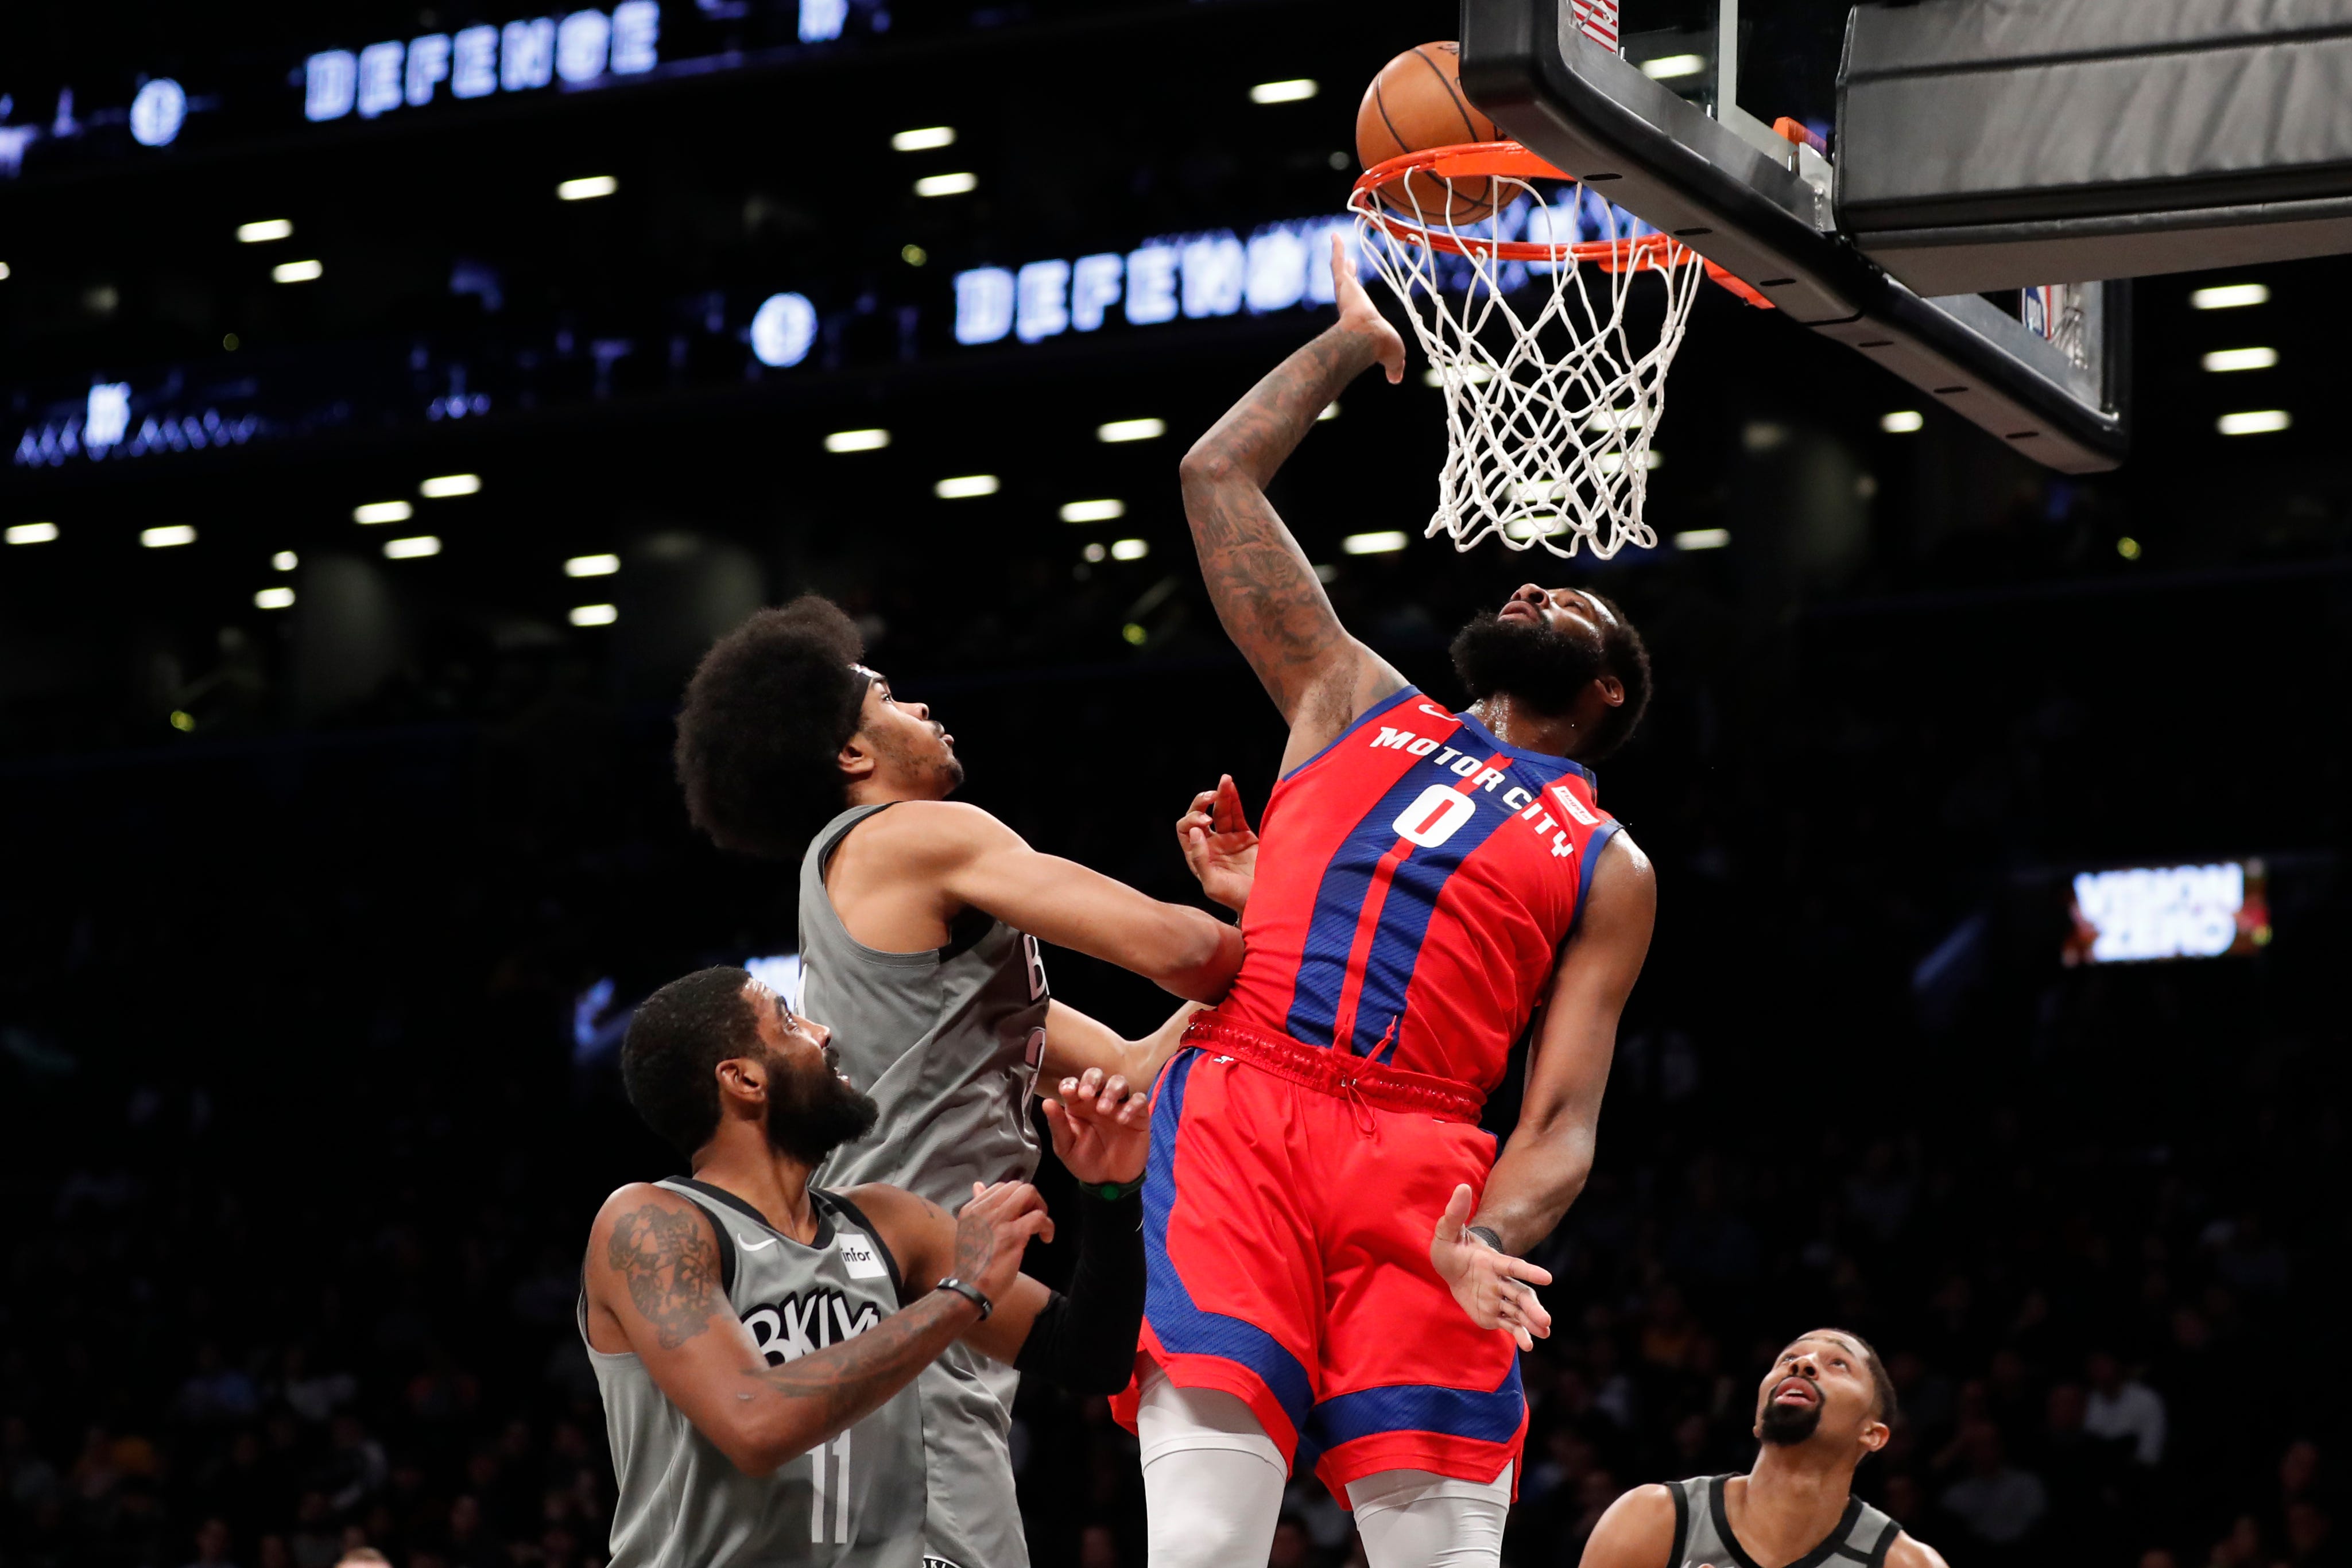 Brooklyn Nets center Jarrett Allen watches as Detroit Pistons center Andre Drummond tips the ball into the net during the first half.